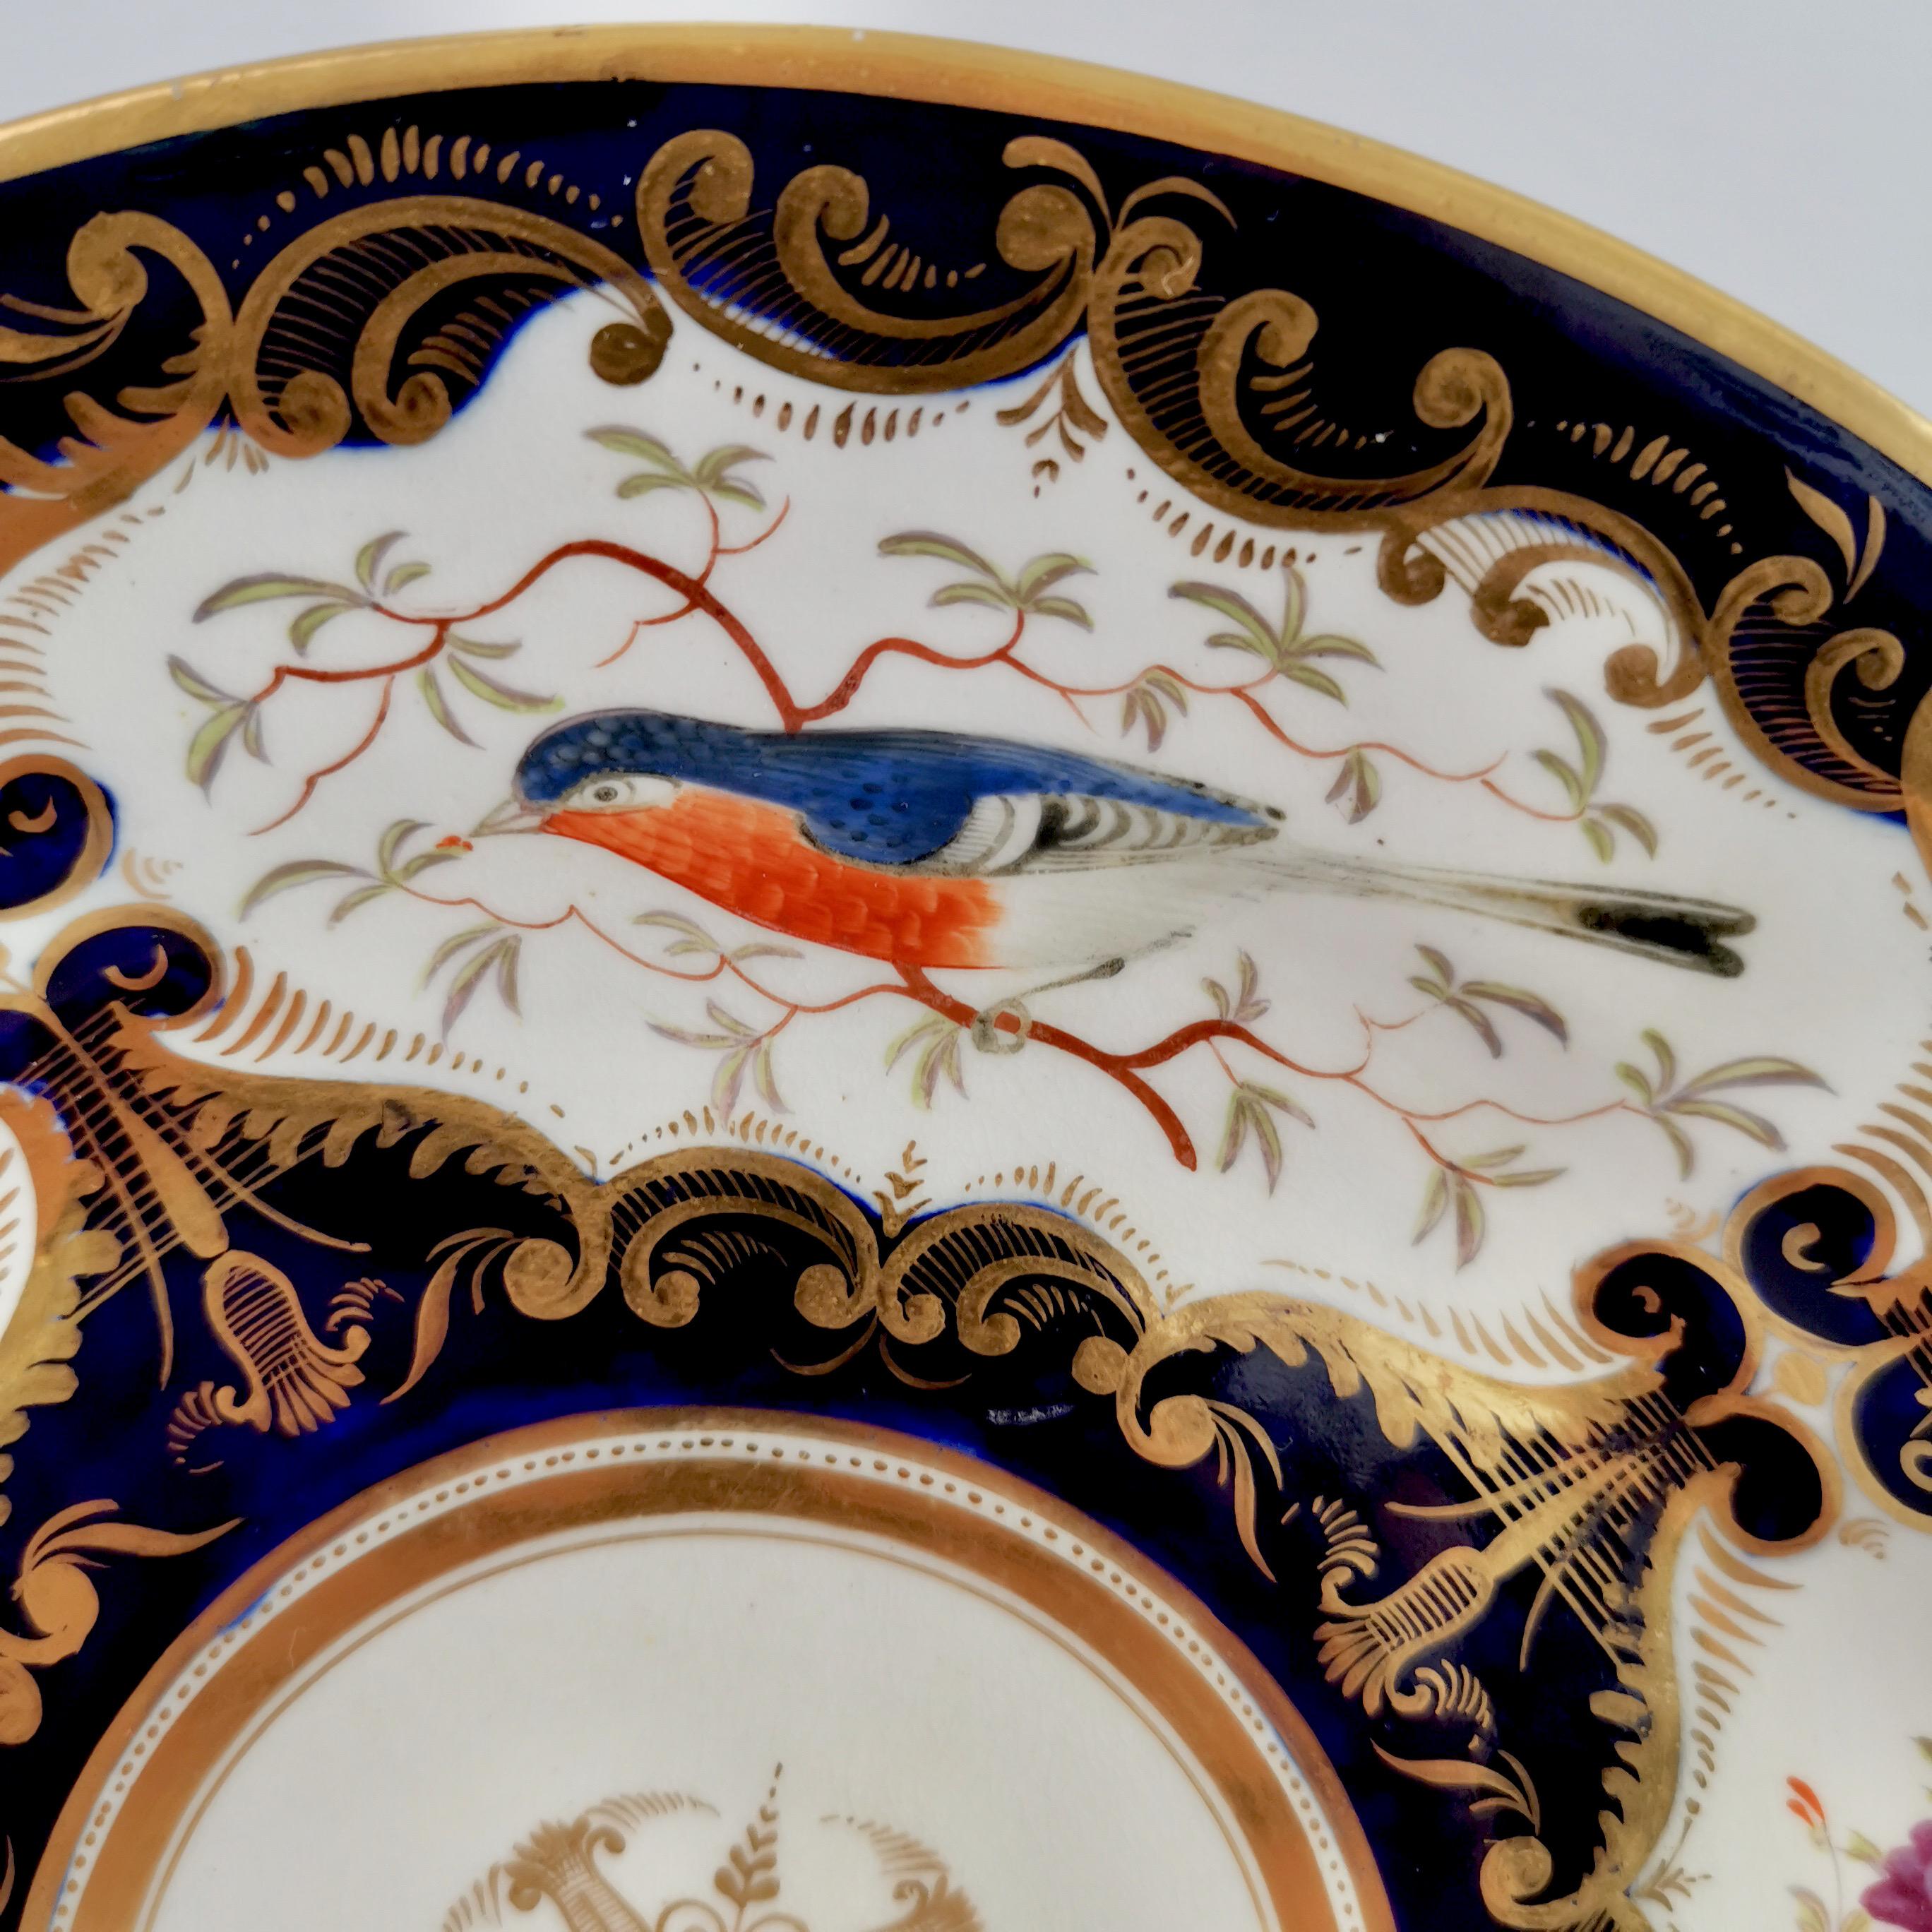 This is a beautiful plate made by Coalport around 1815. The plate bears the famous and very wonderful bird pattern with the number 759. Panels with stunning hand painted birds are set in a cobalt blue background with rich gilt decoration. 
